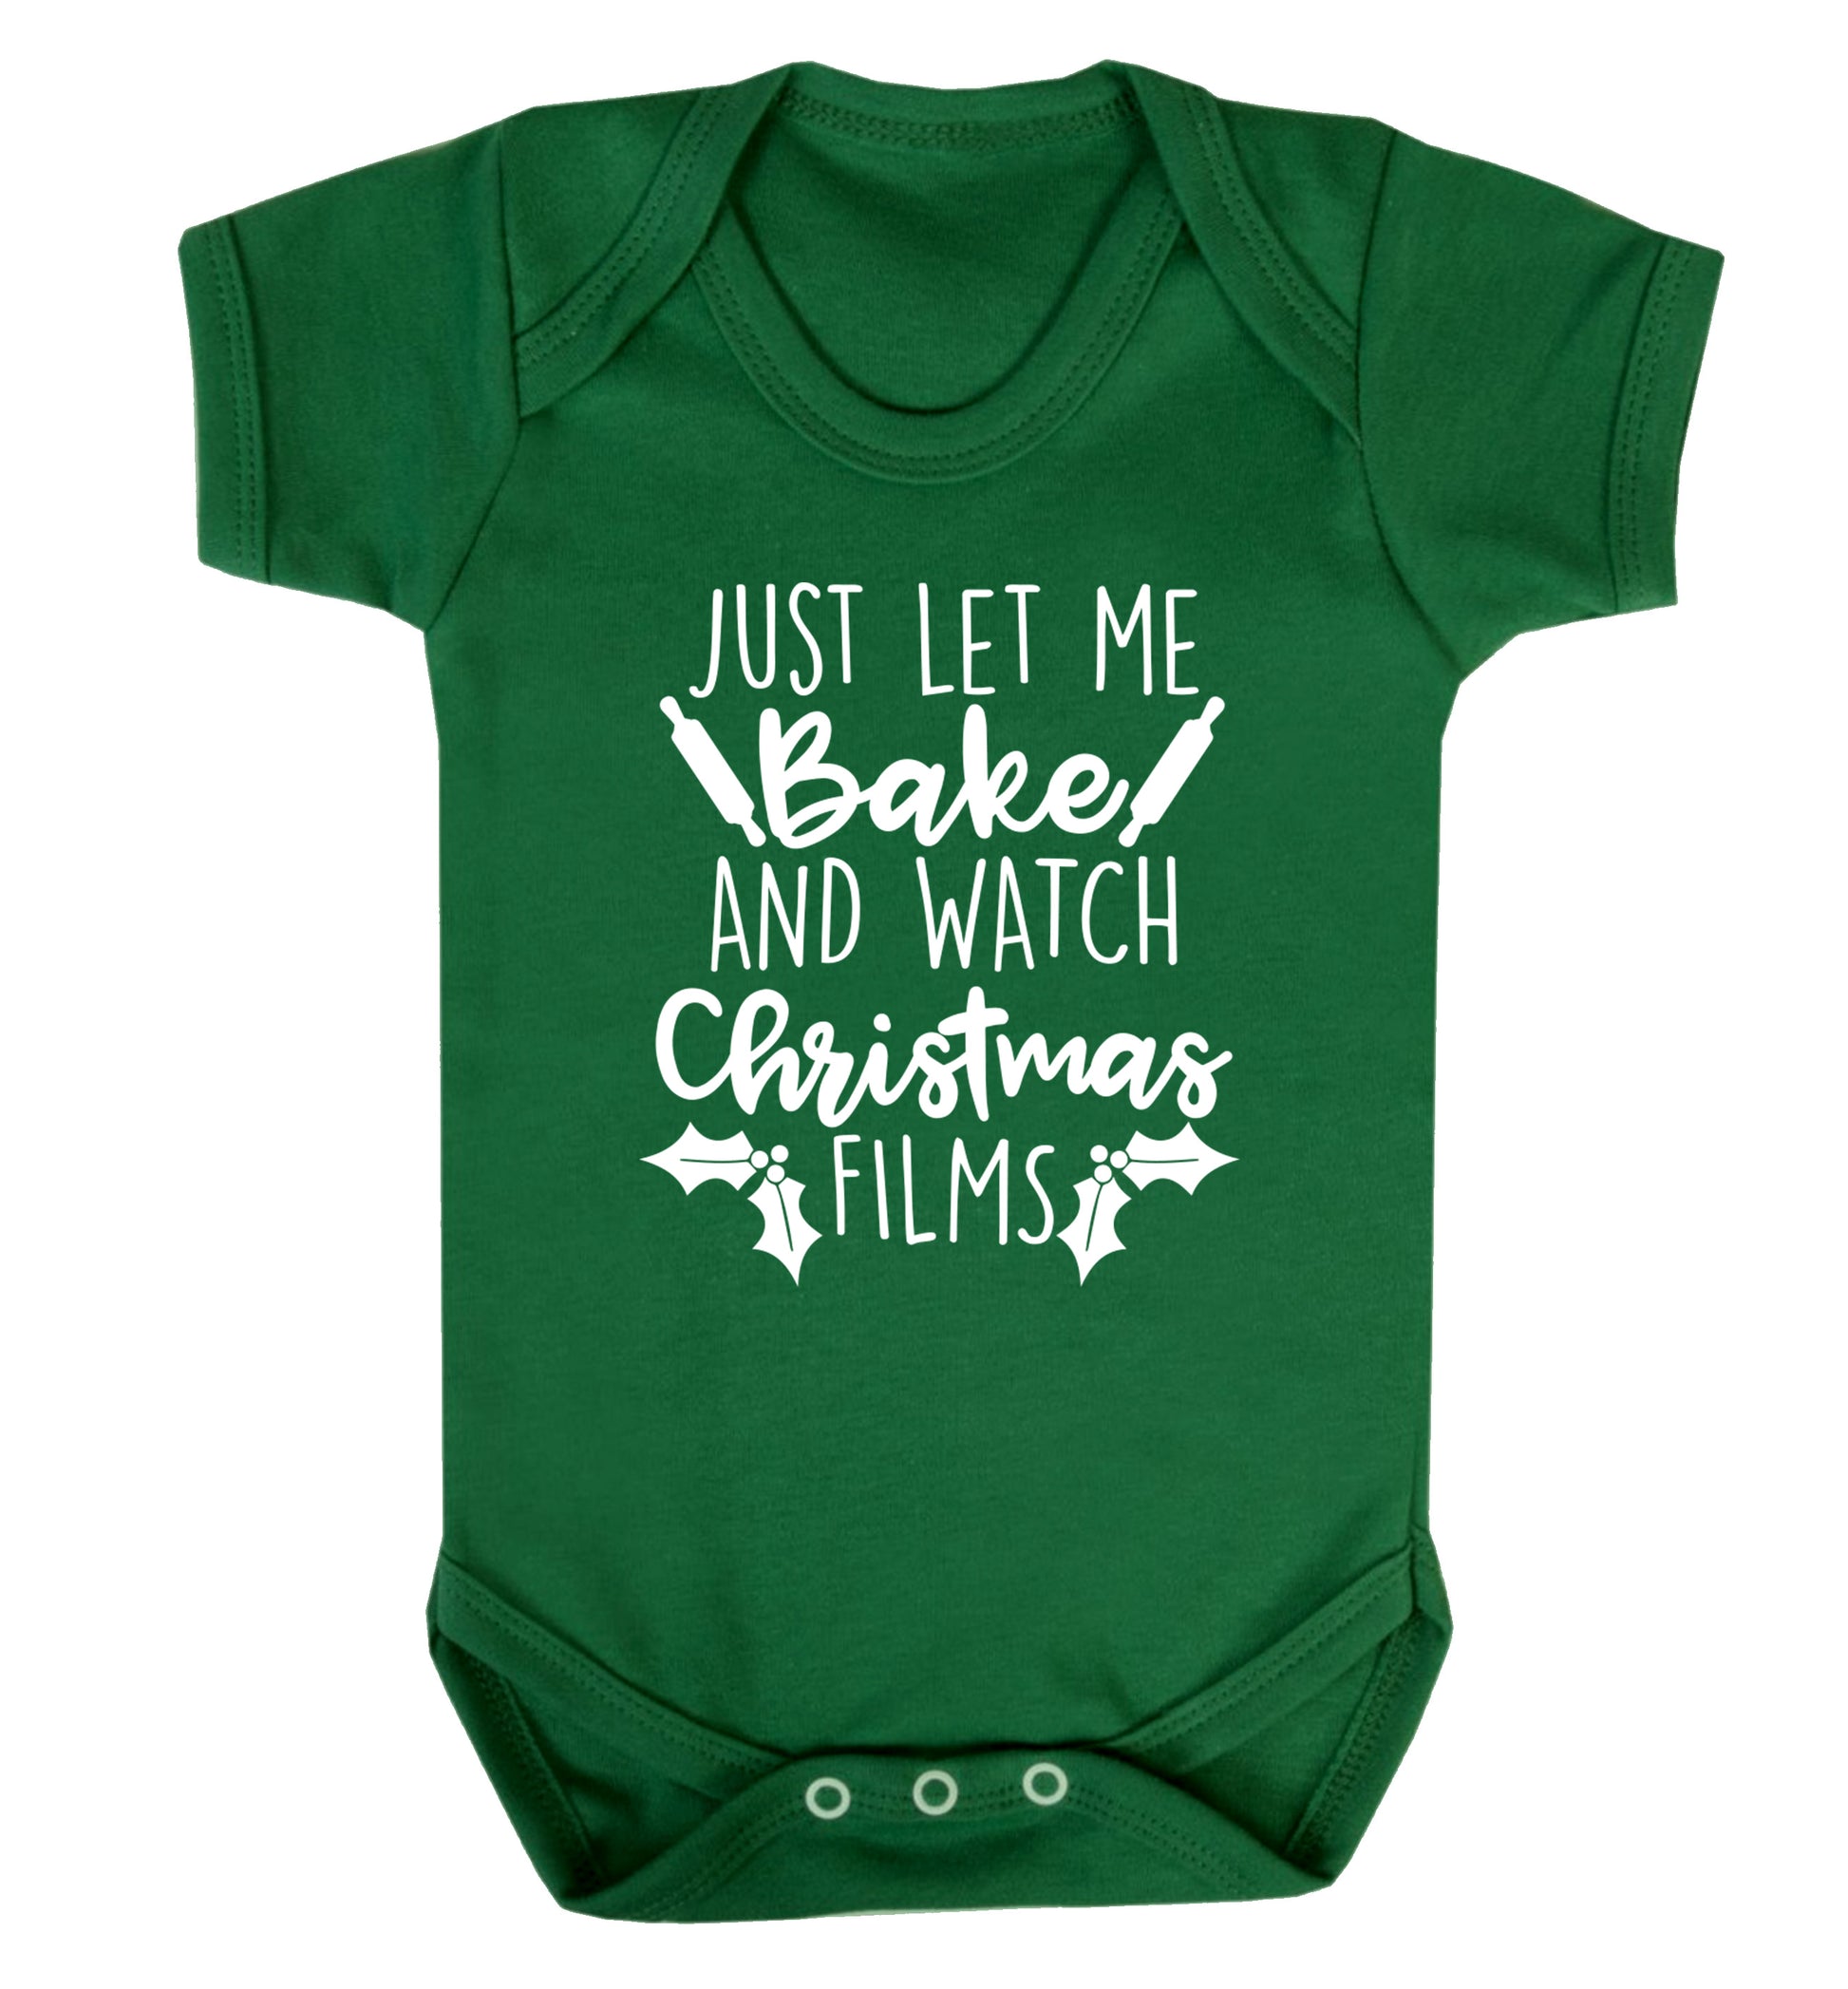 Just let me bake and watch Christmas films Baby Vest green 18-24 months